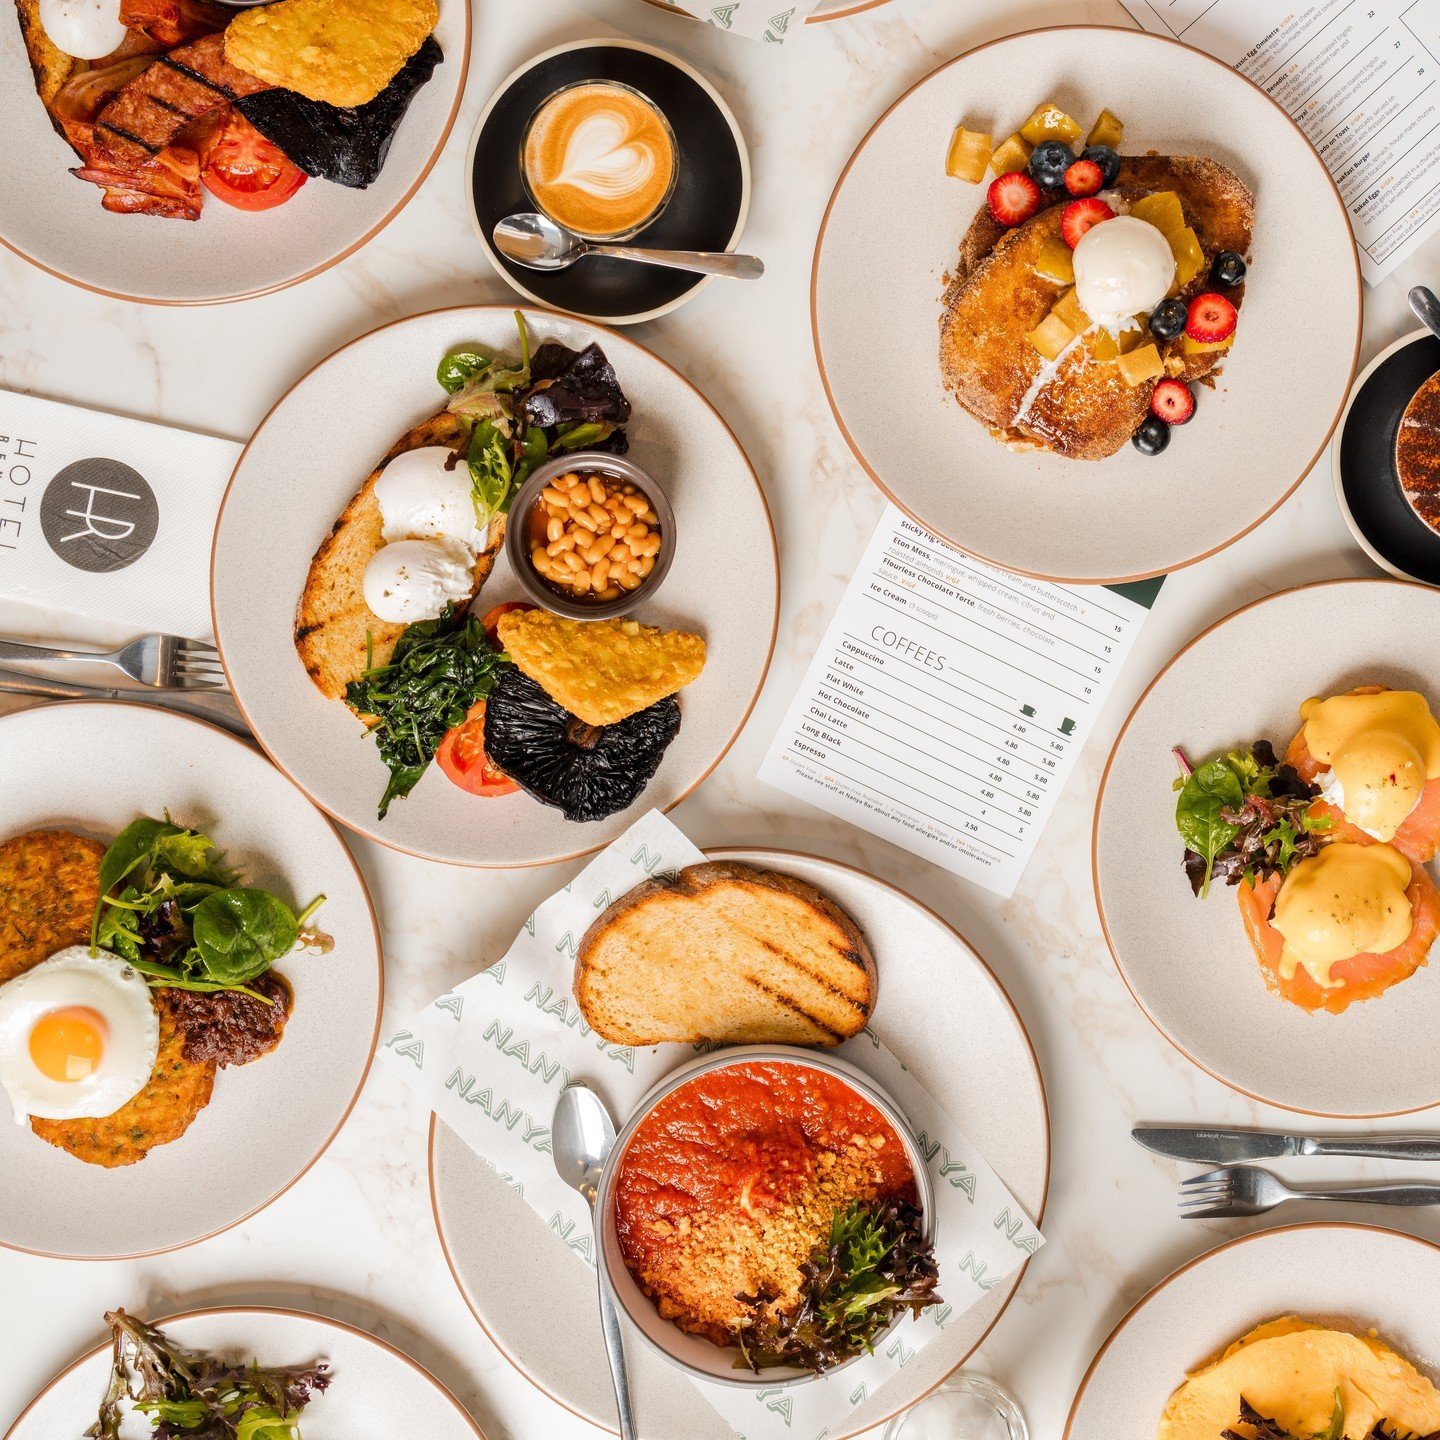 Who's eager to try our new brekkie menu!? Start your day with a breakfast classic, or try something a little different. 🥞
What's been your favourite dish? Comment below ⬇️